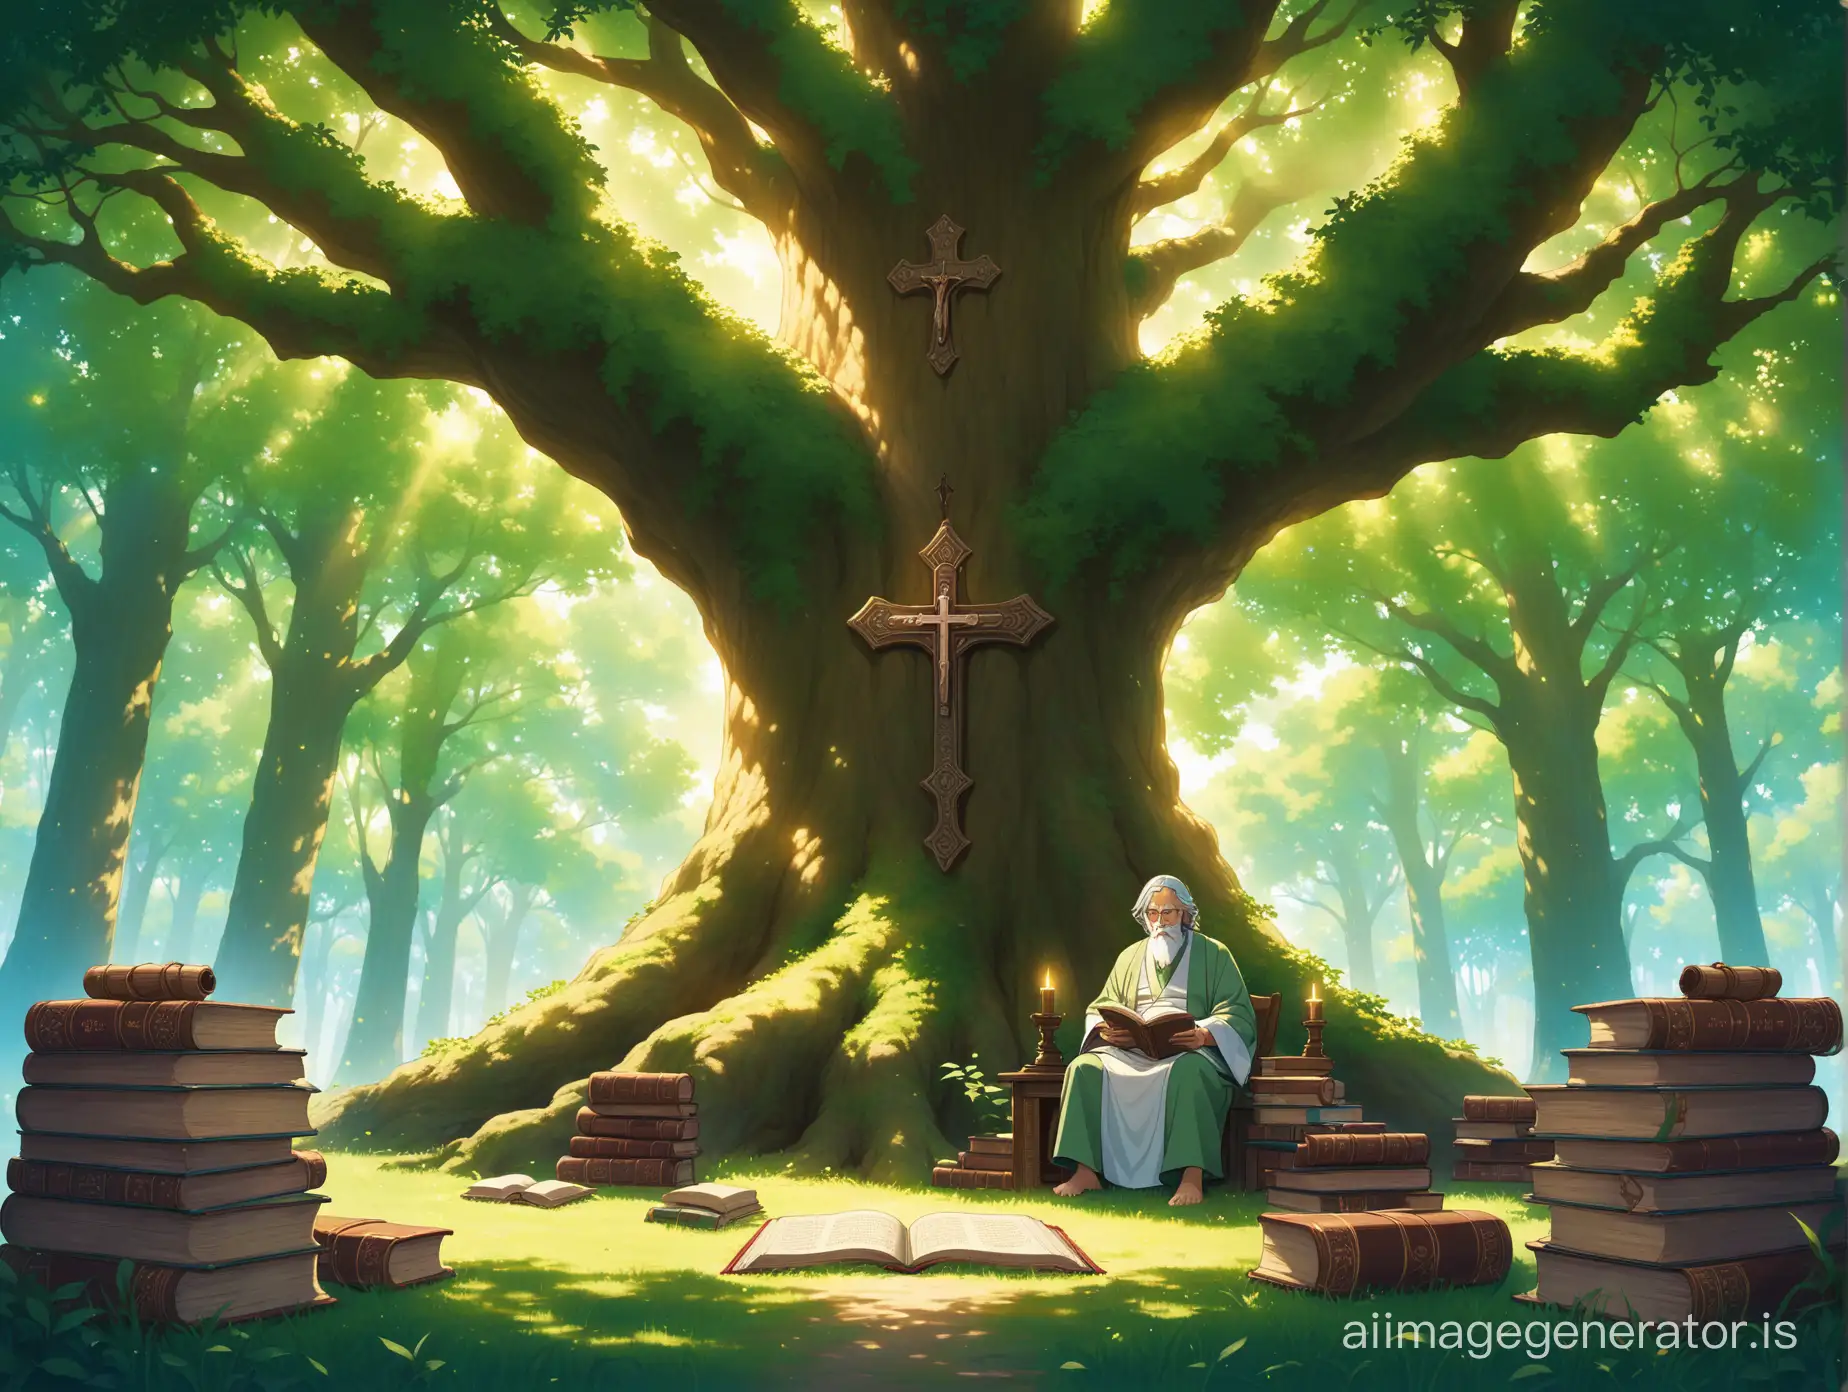 An image of a serene forest clearing with an aged sage sitting cross-legged under the shade of a massive tree, surrounded by books and scrolls, his eyes reflecting wisdom beyond his years.